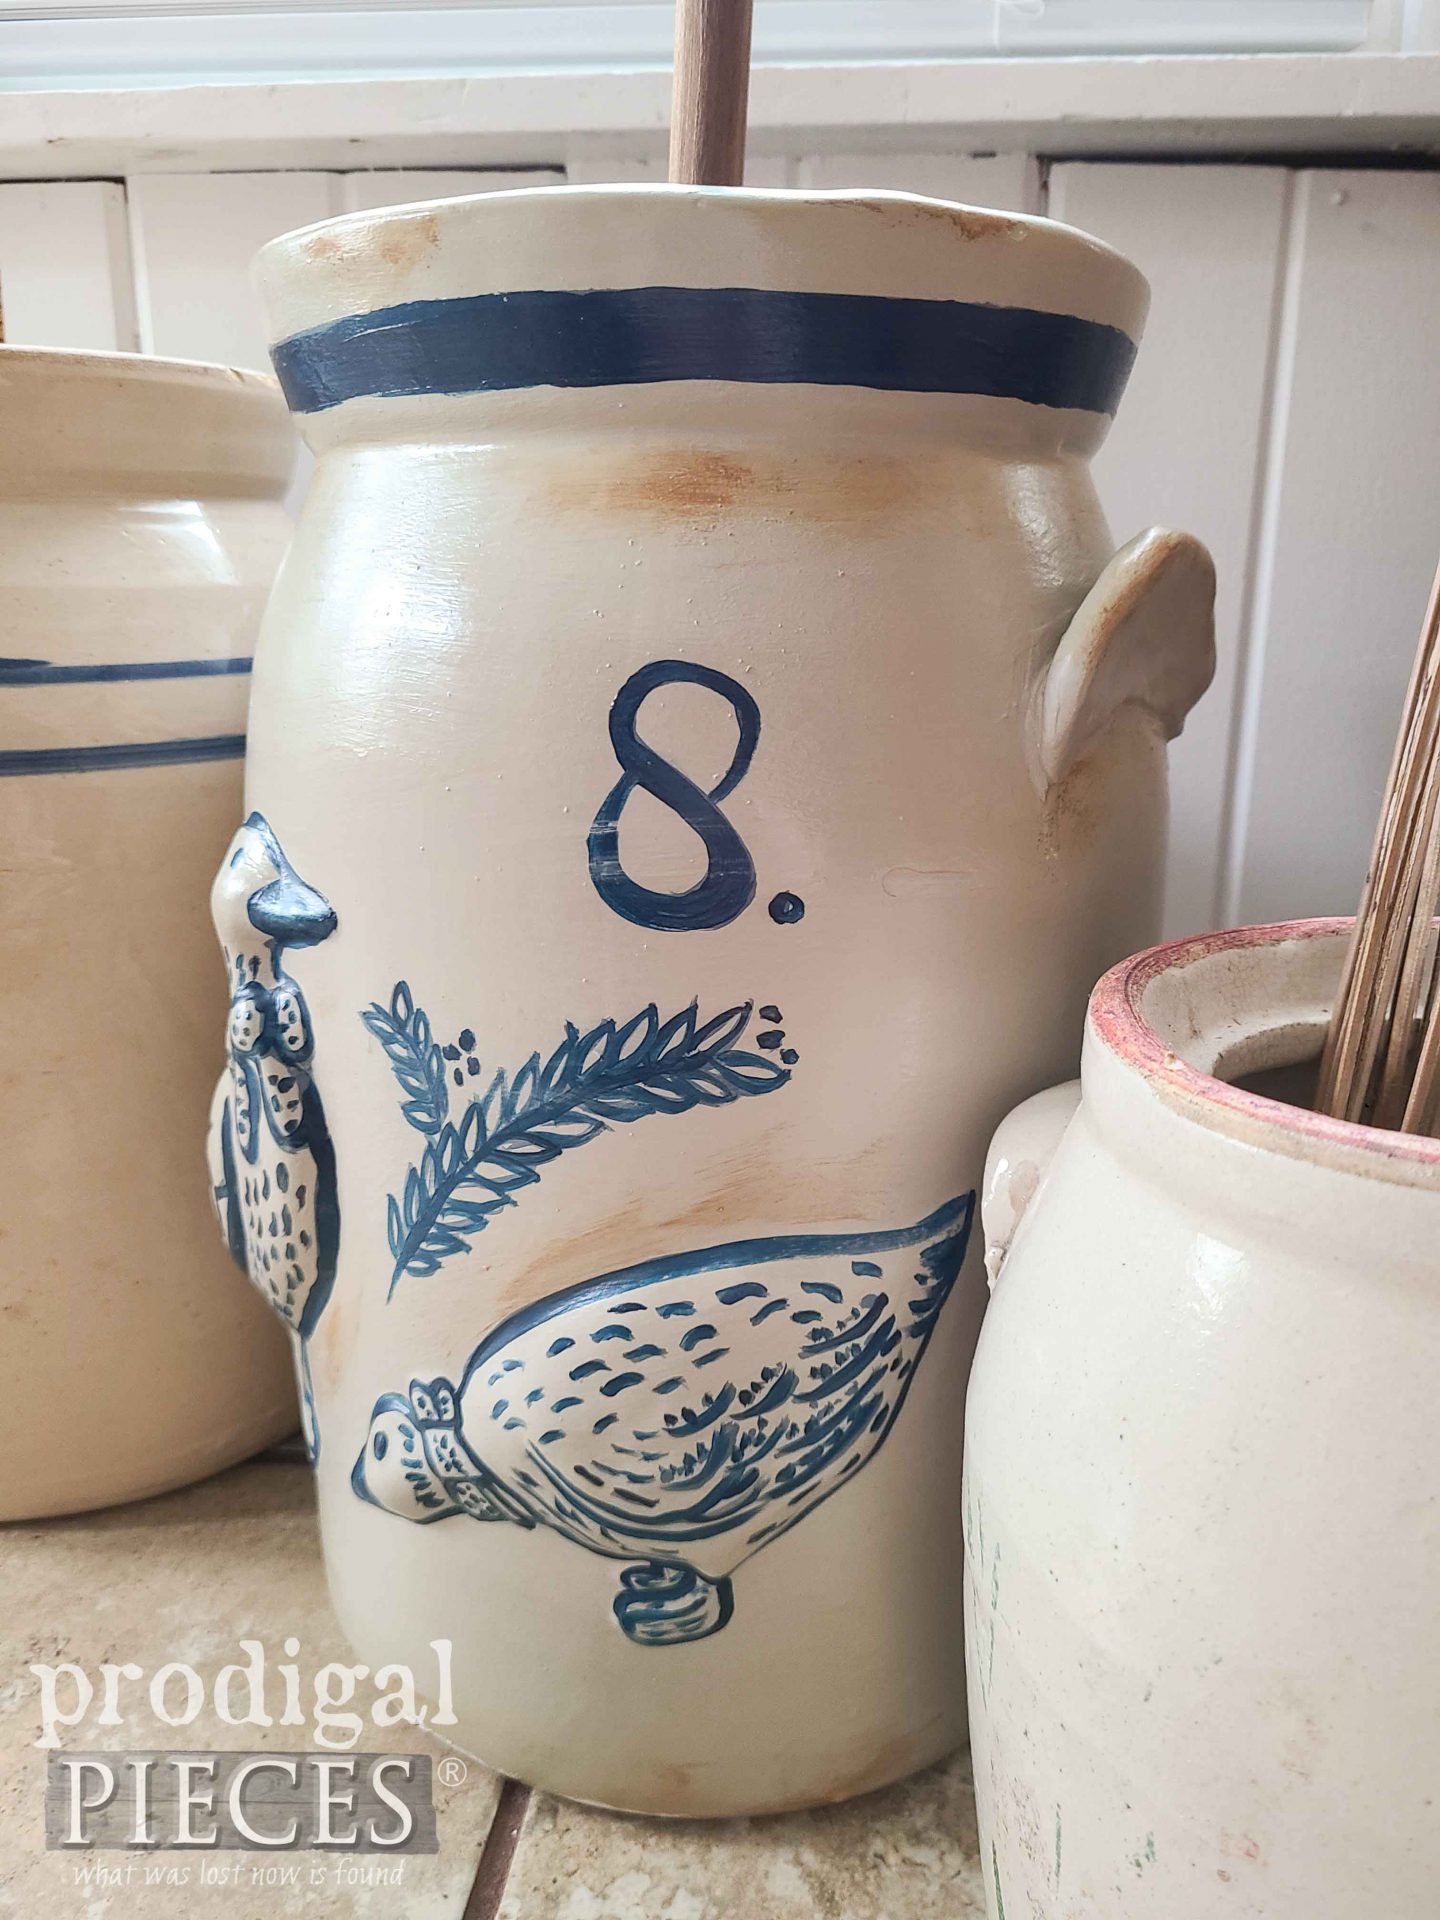 Number 8 Vintage Buttern Churn by Laarissa of Prodigal Pieces | How to Paint Ceramic | prodigalpieces.com #prodigalpieces #farmhouse #diy